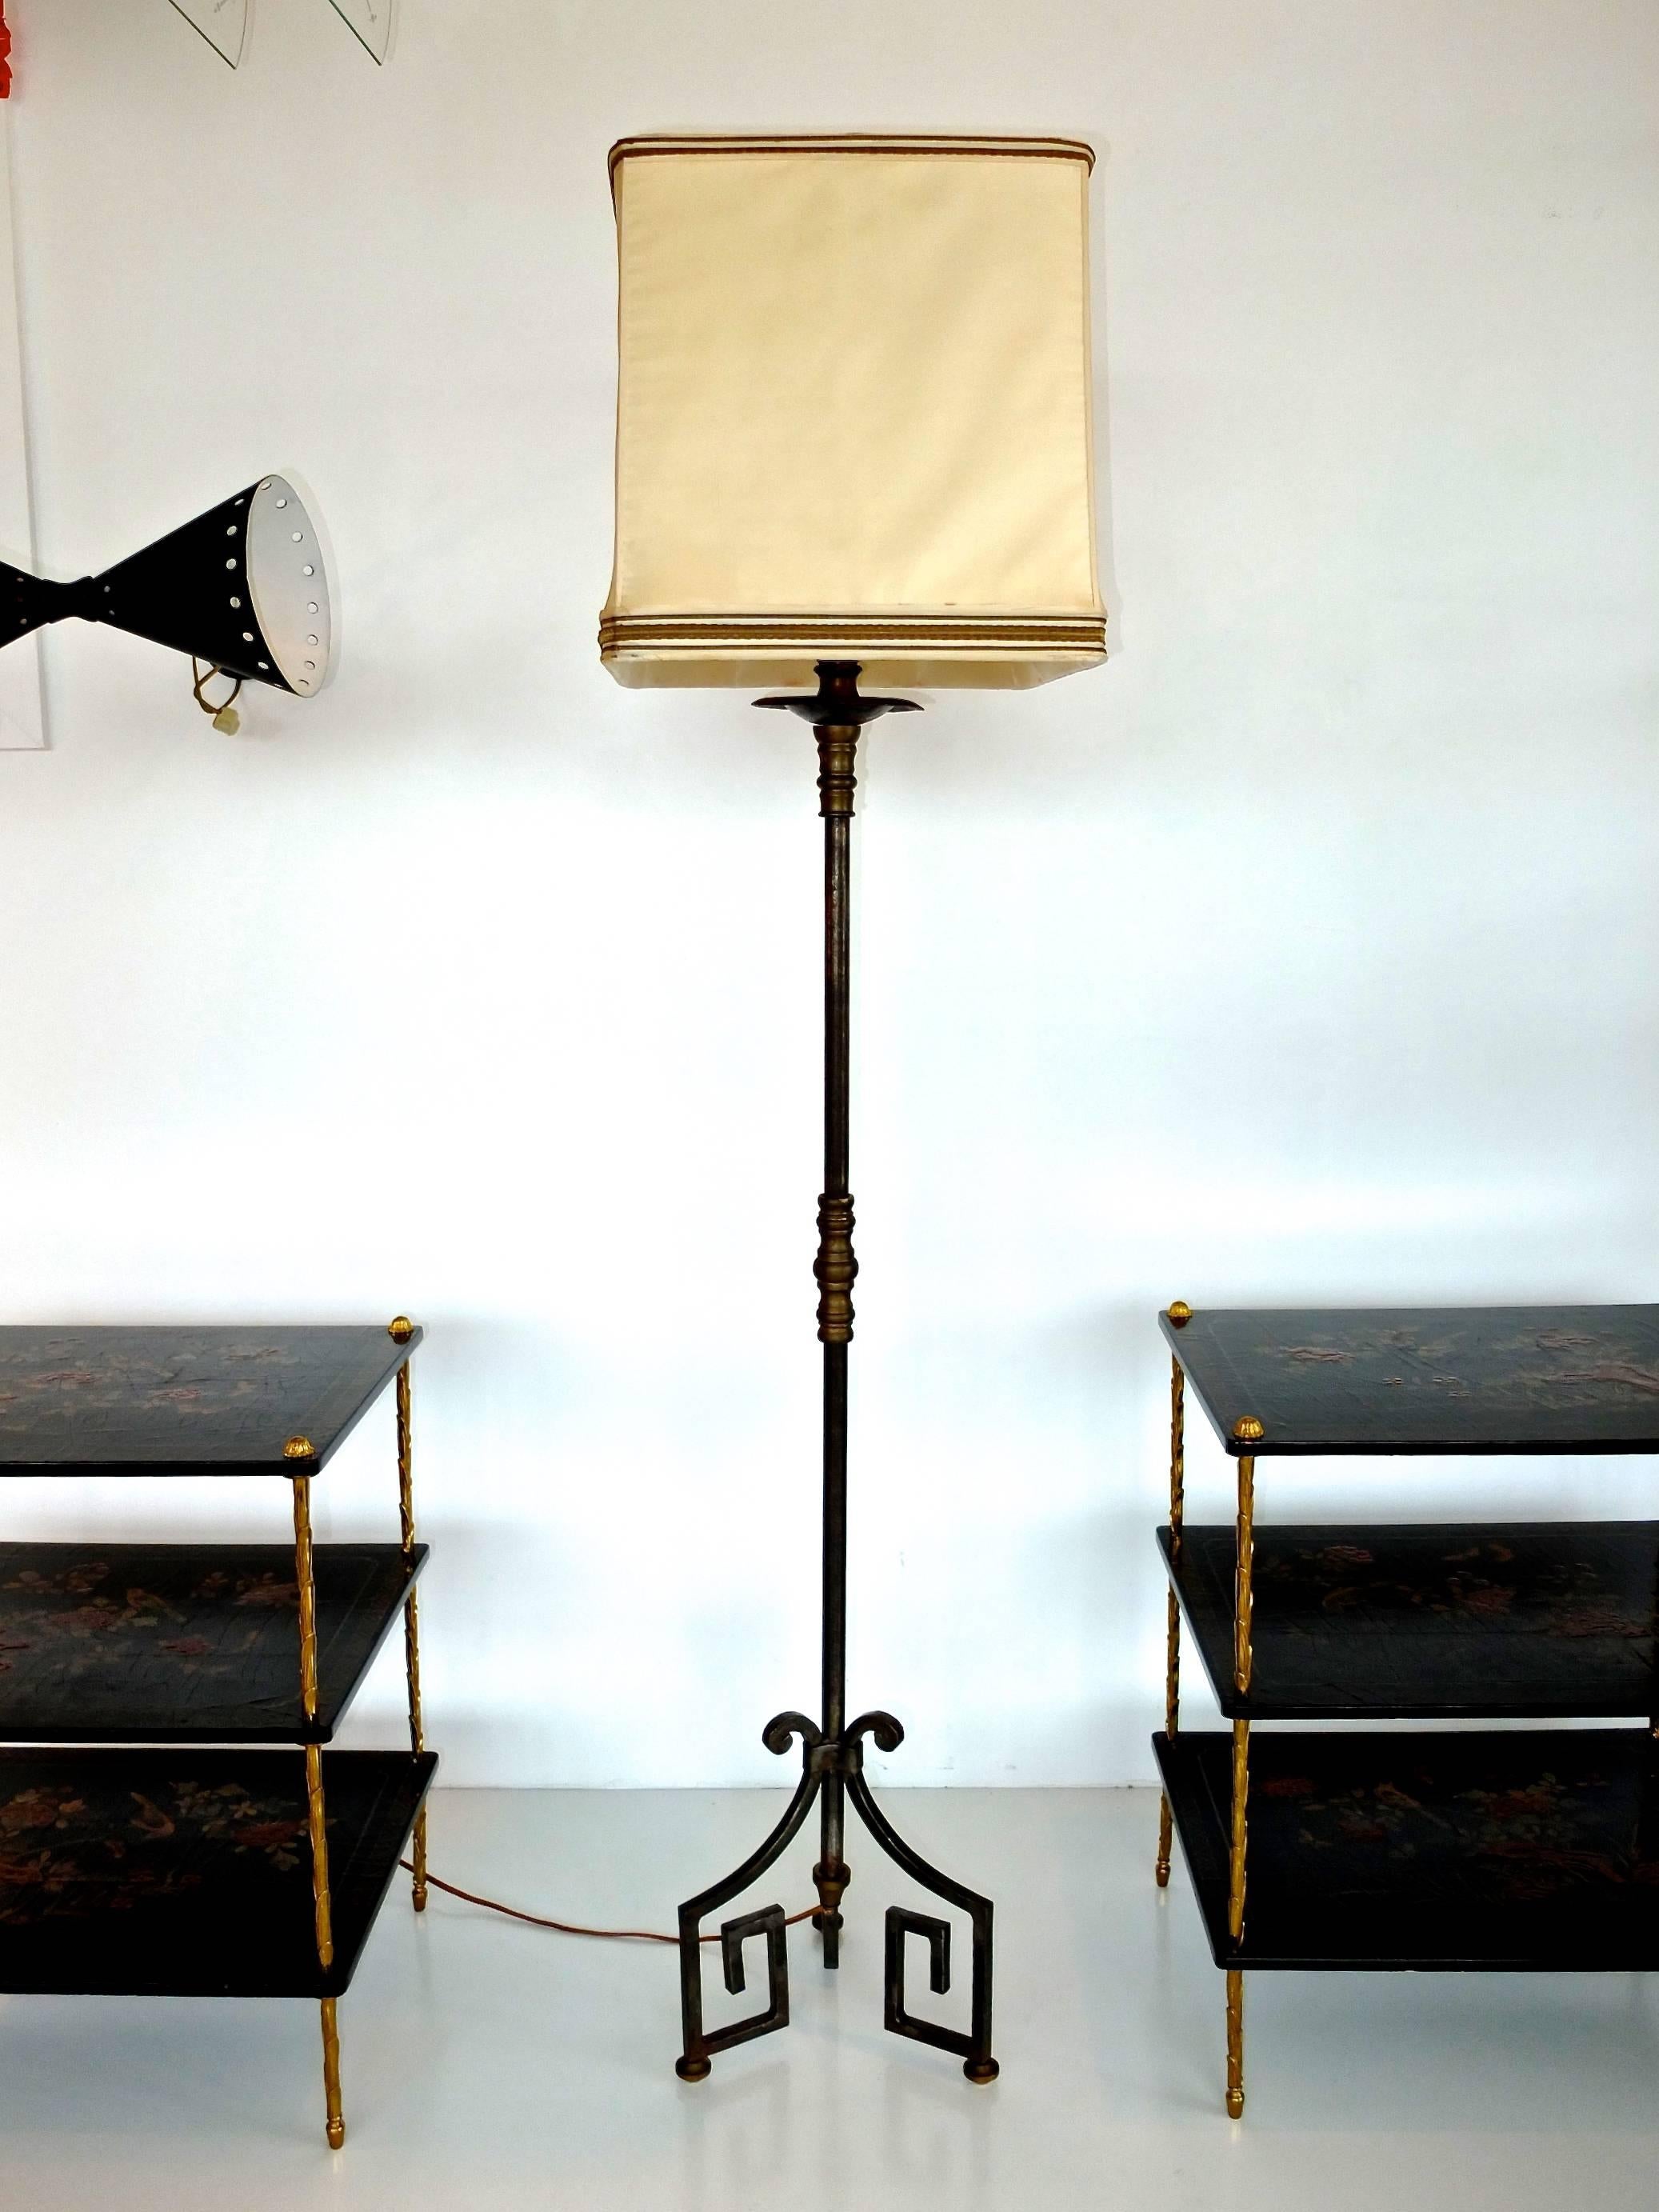 High end French Mid-Century floor lamp in fer forge hand-wrought iron with Greek Key tripod base and bronze embellishments....bronze foot pads and bronze turning midway on stem.

Original box frame shade included. 15